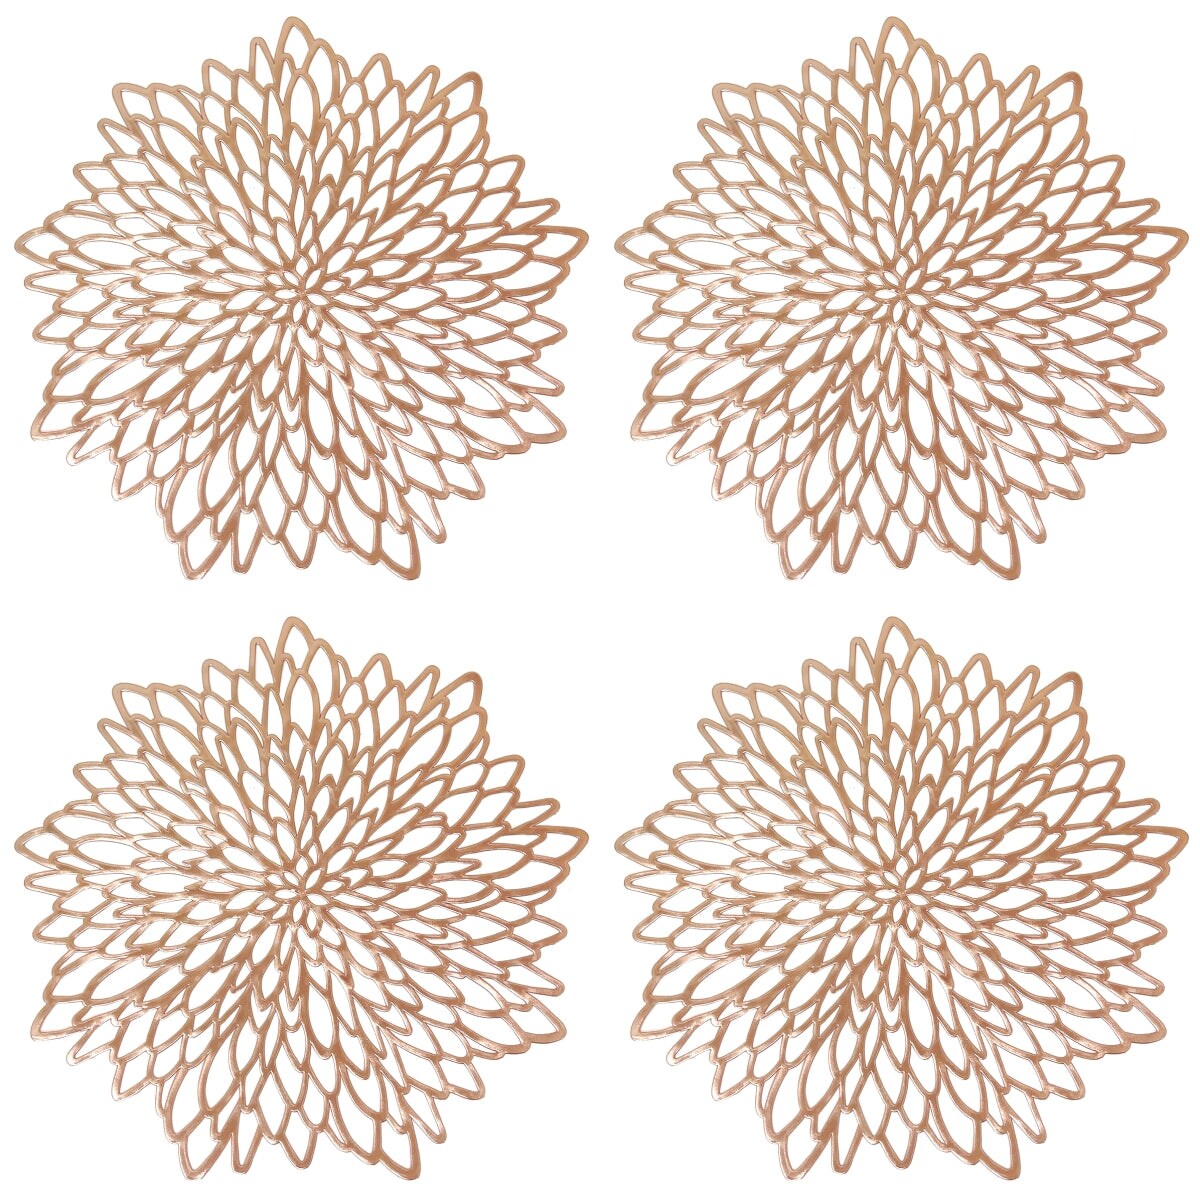 Wrapables Vinyl Metallic Colored Placemats for Weddings, Parties, Special Events (Set of 4), Rose Gold Blossom